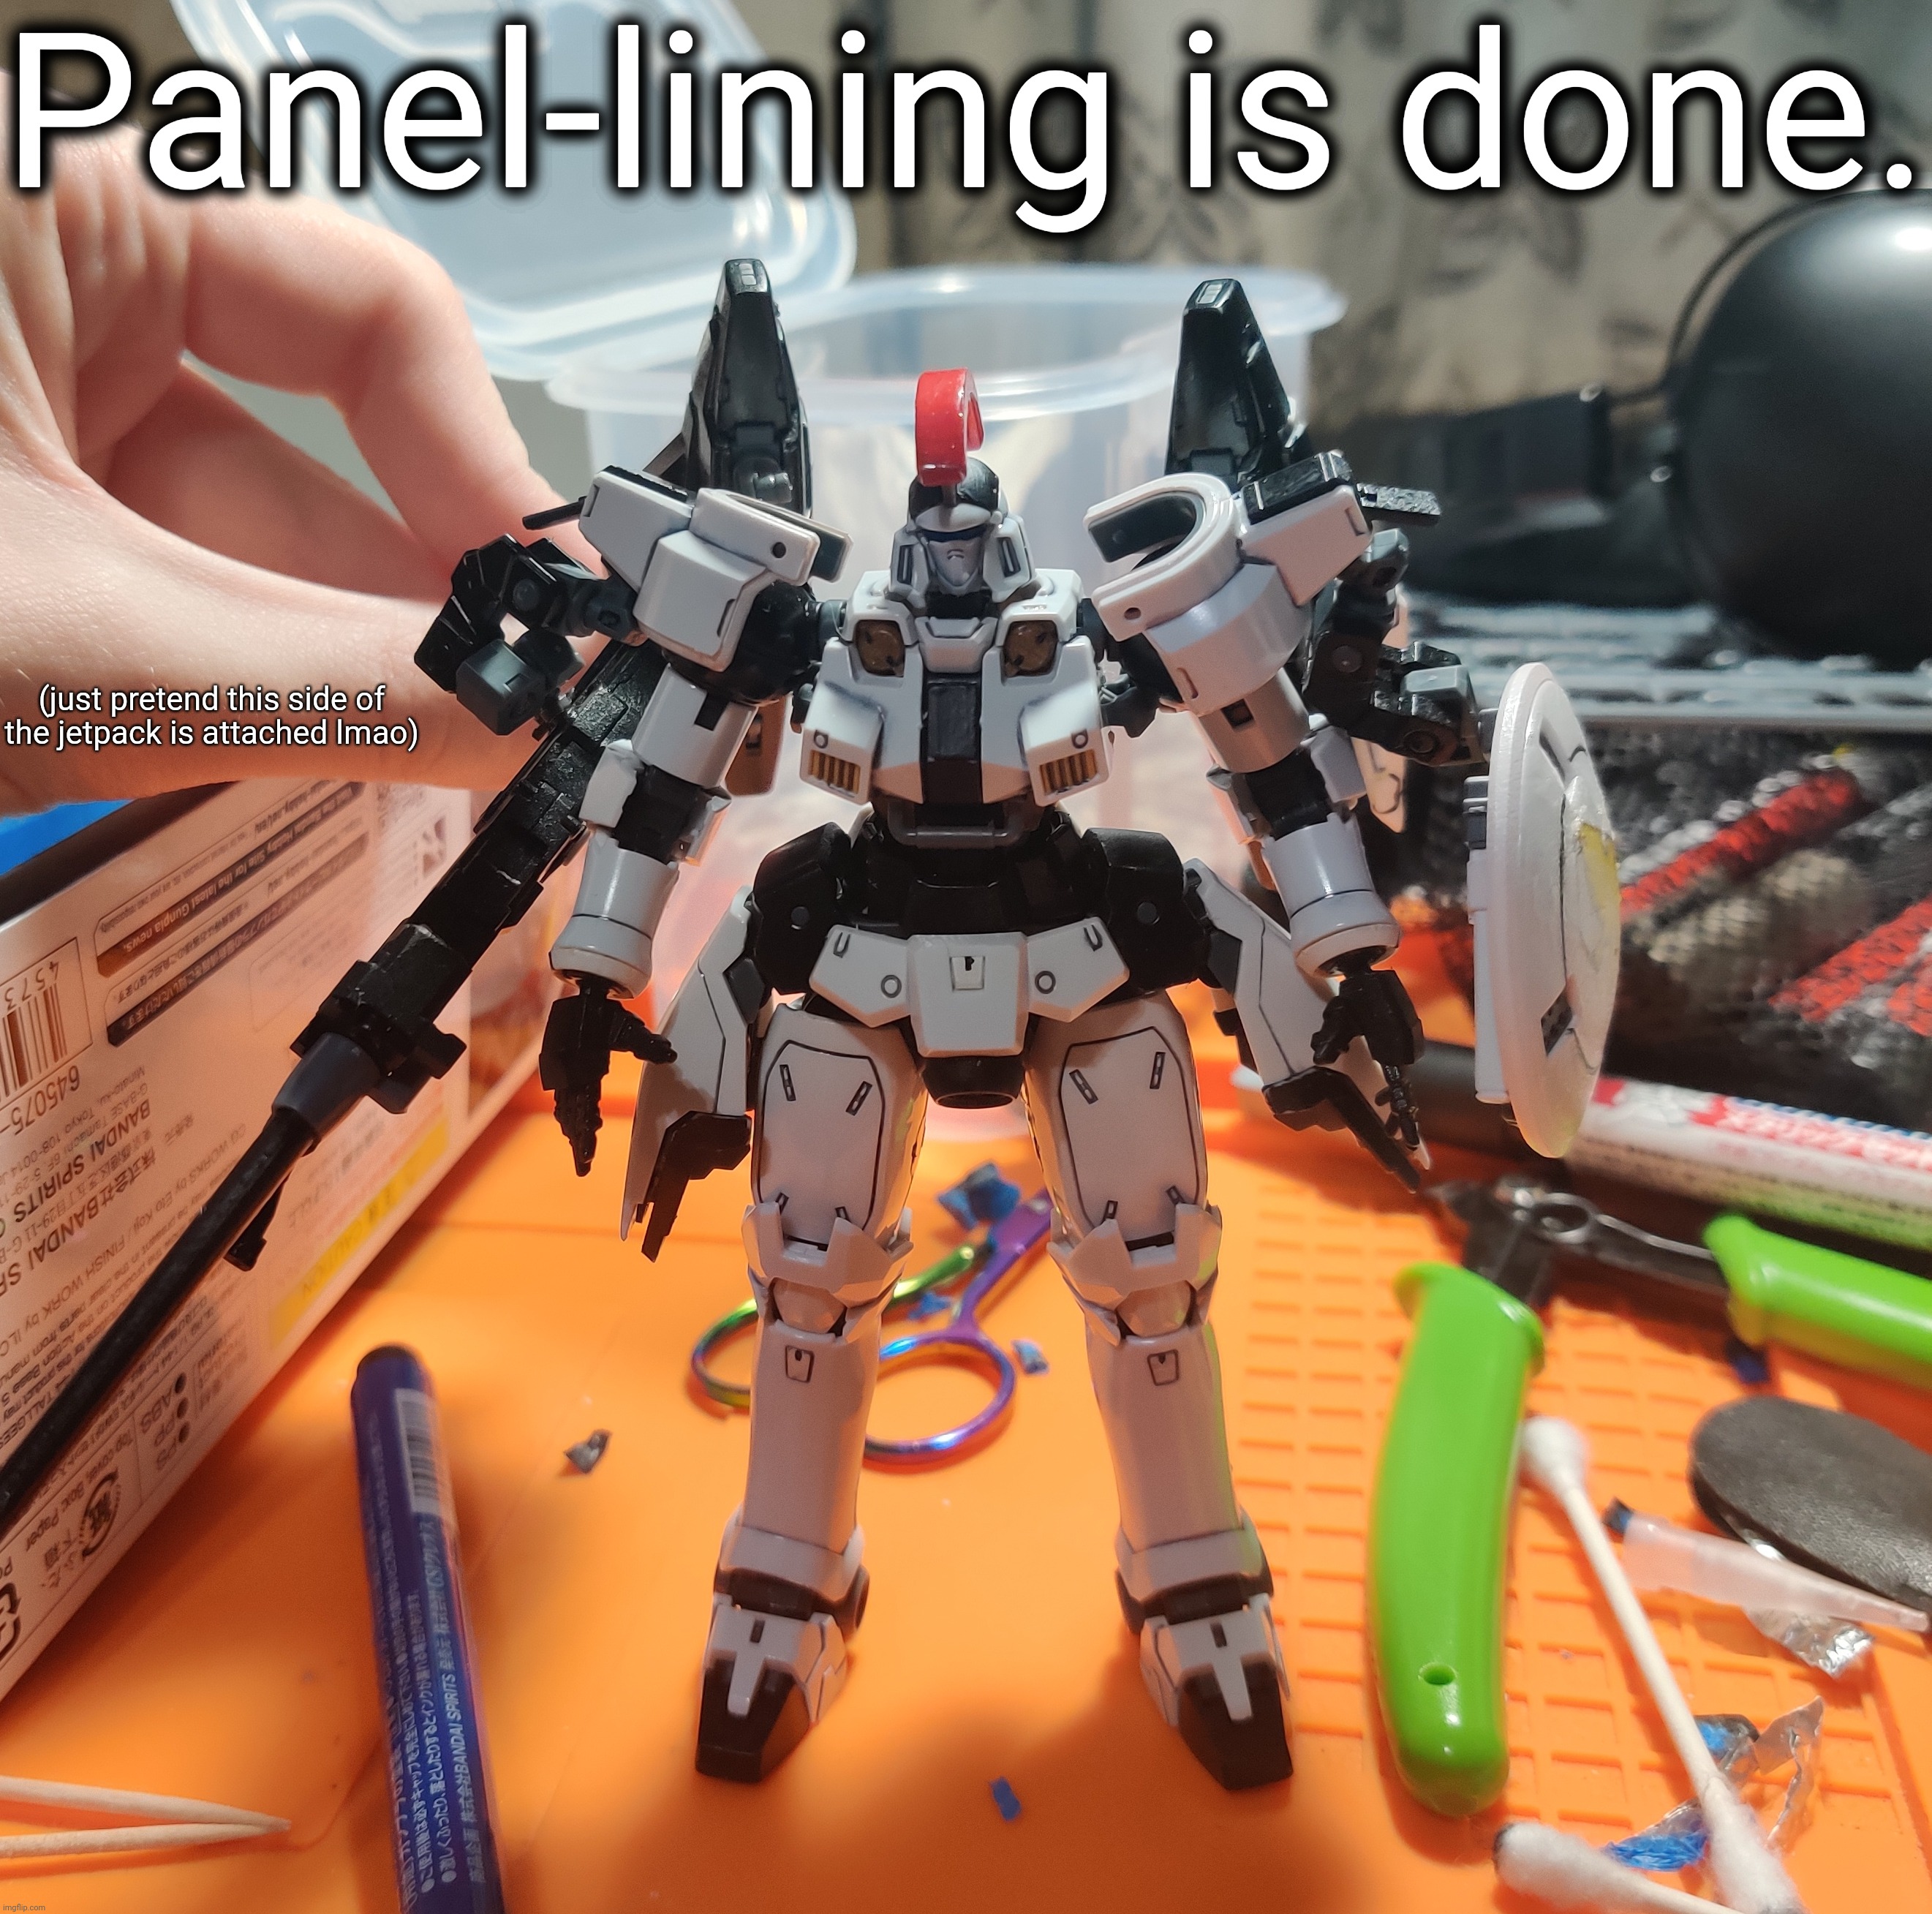 I'm still pissed that the part broke | Panel-lining is done. (just pretend this side of the jetpack is attached lmao) | made w/ Imgflip meme maker